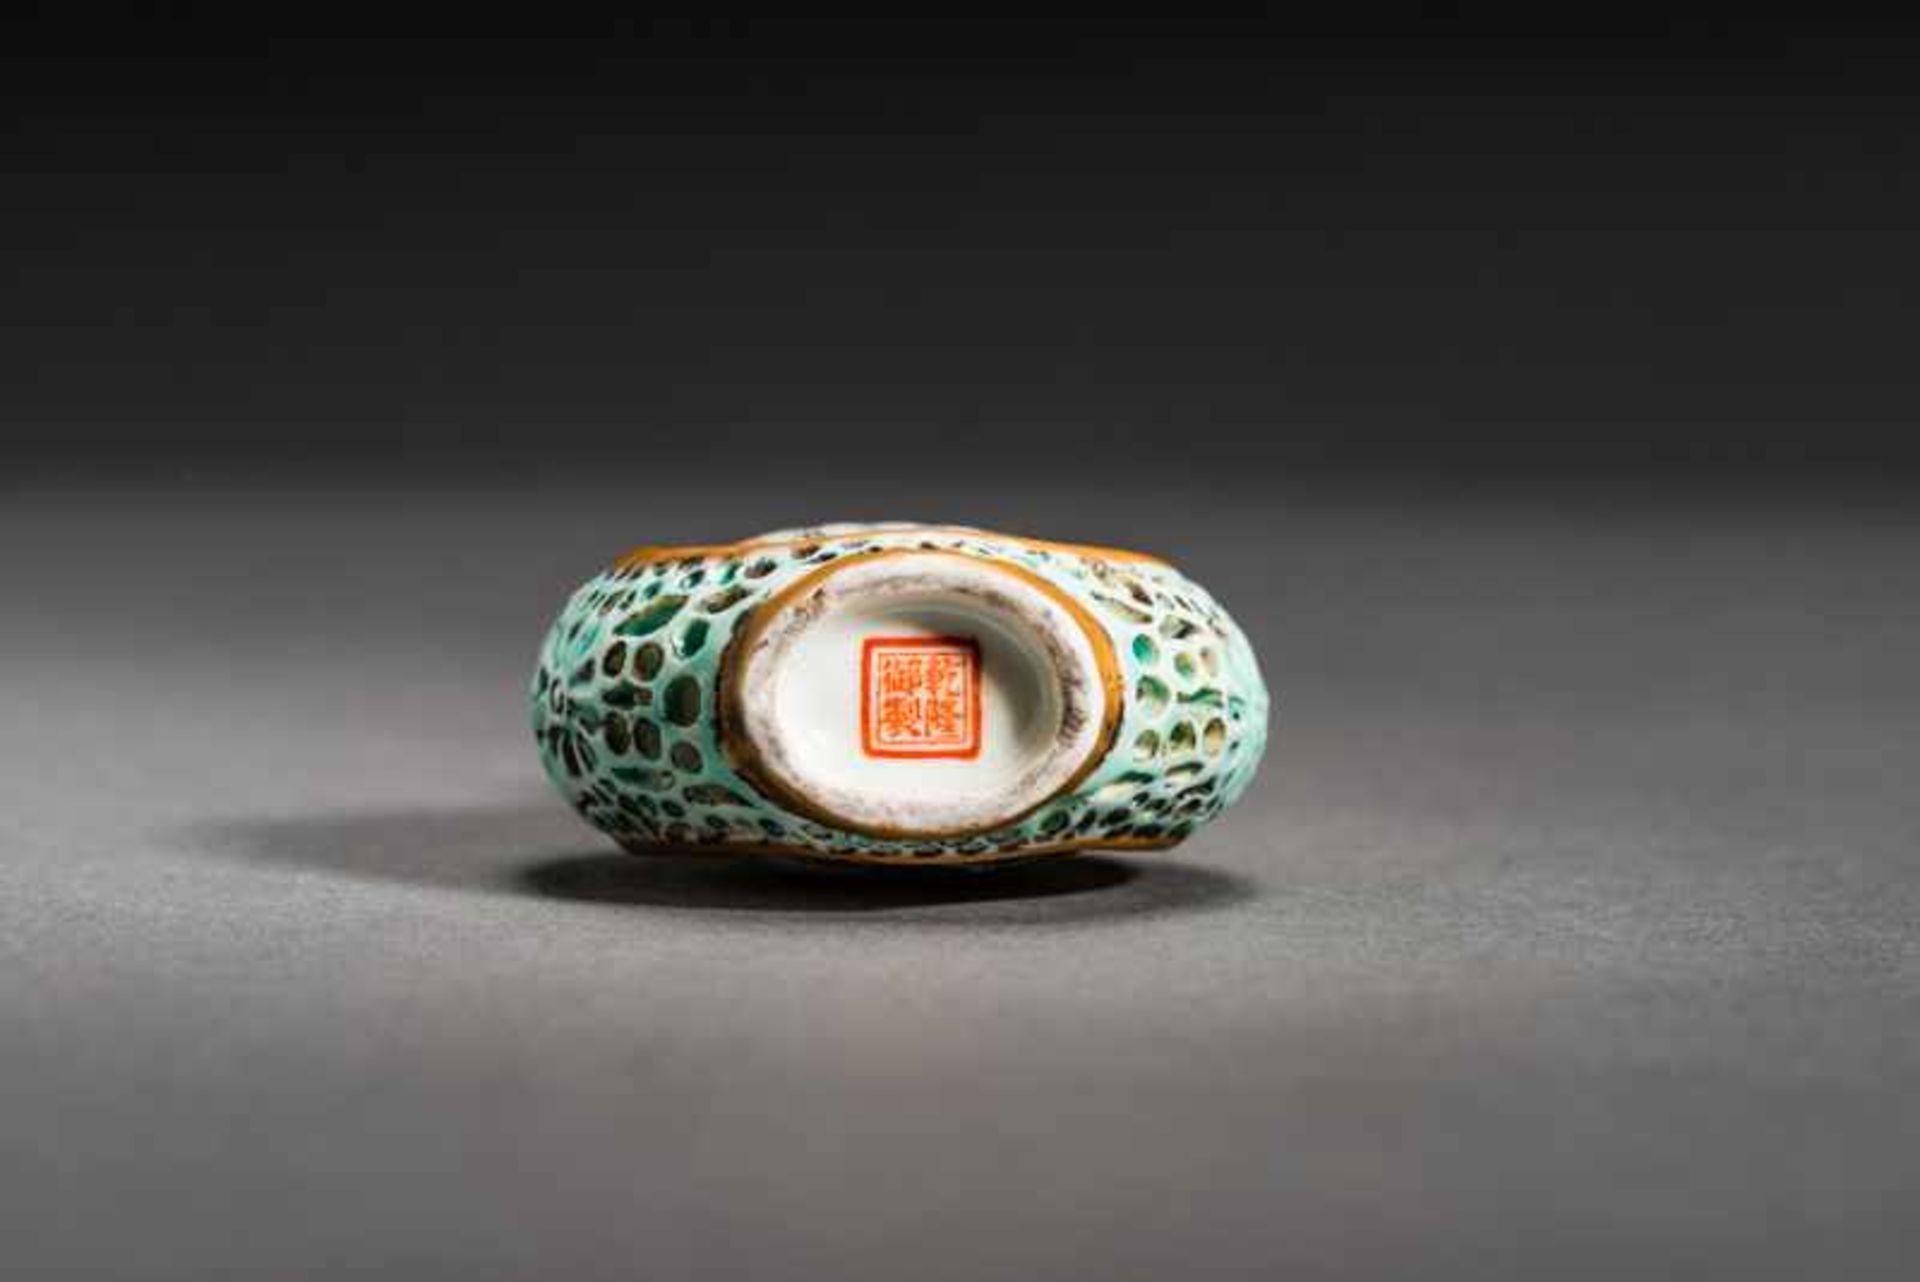 SHANSHUI LANDSCAPE AND POEM Porcelain with paint. Stopper: gilded porcelain, ivory spoon. China, - Image 5 of 6